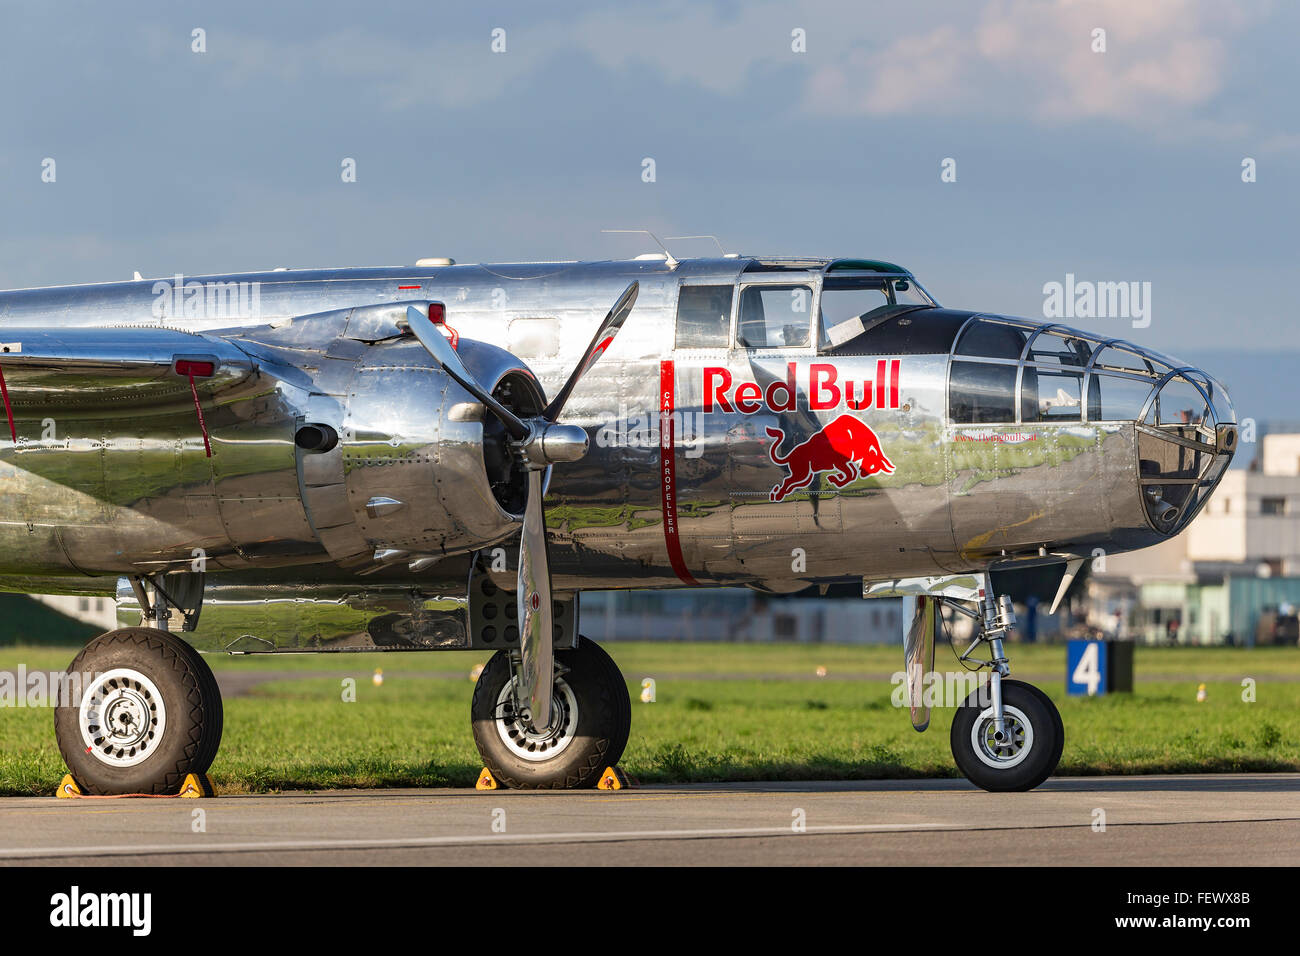 North American Aviation B-25 Mitchell bomber (registration N6123C) operated by Red Bull’s “The Flying Bulls”. Stock Photo